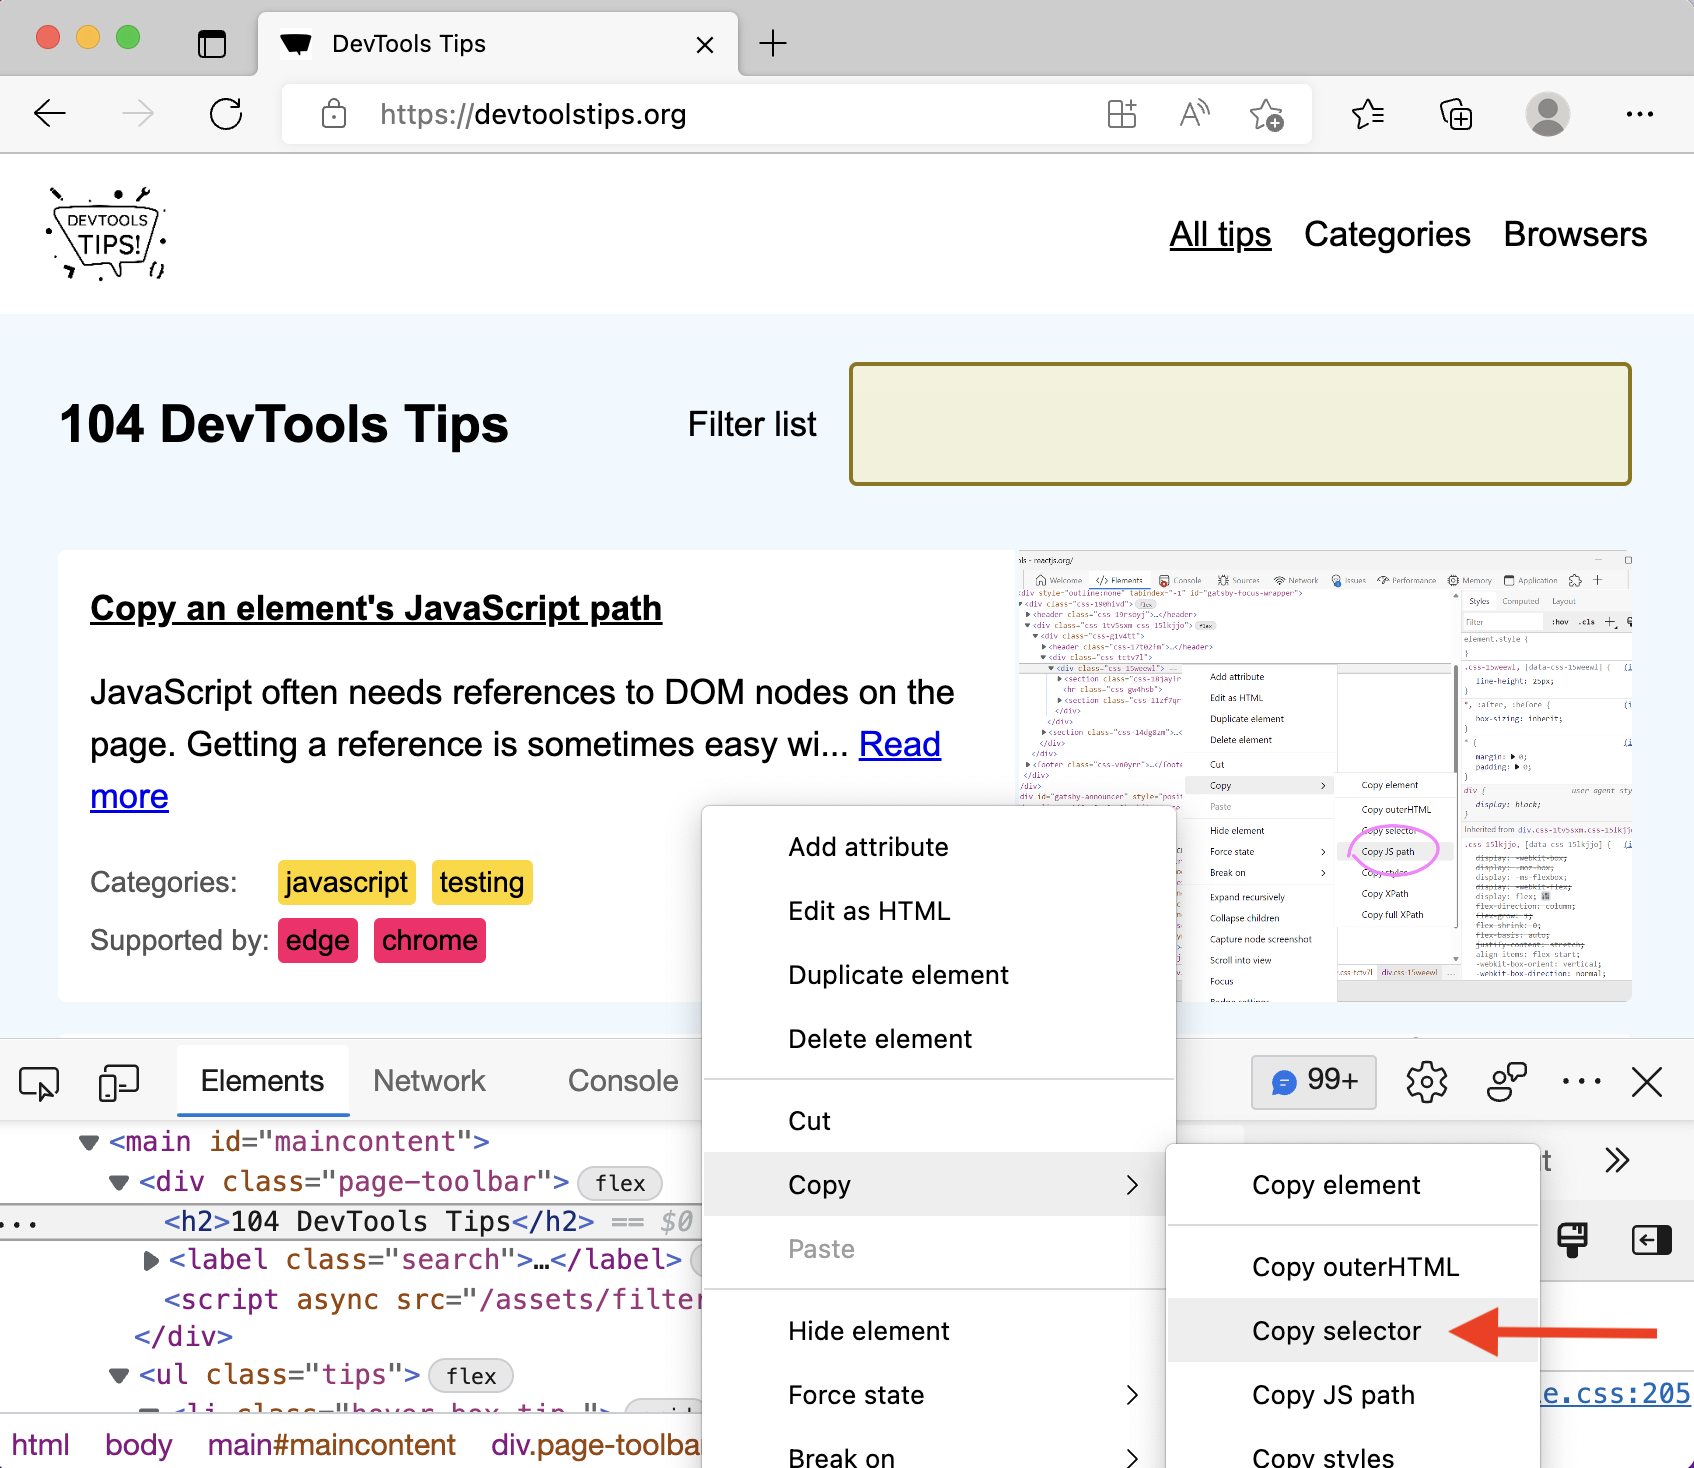 Edge DevTools, showing how to access the Copy CSS selector option.